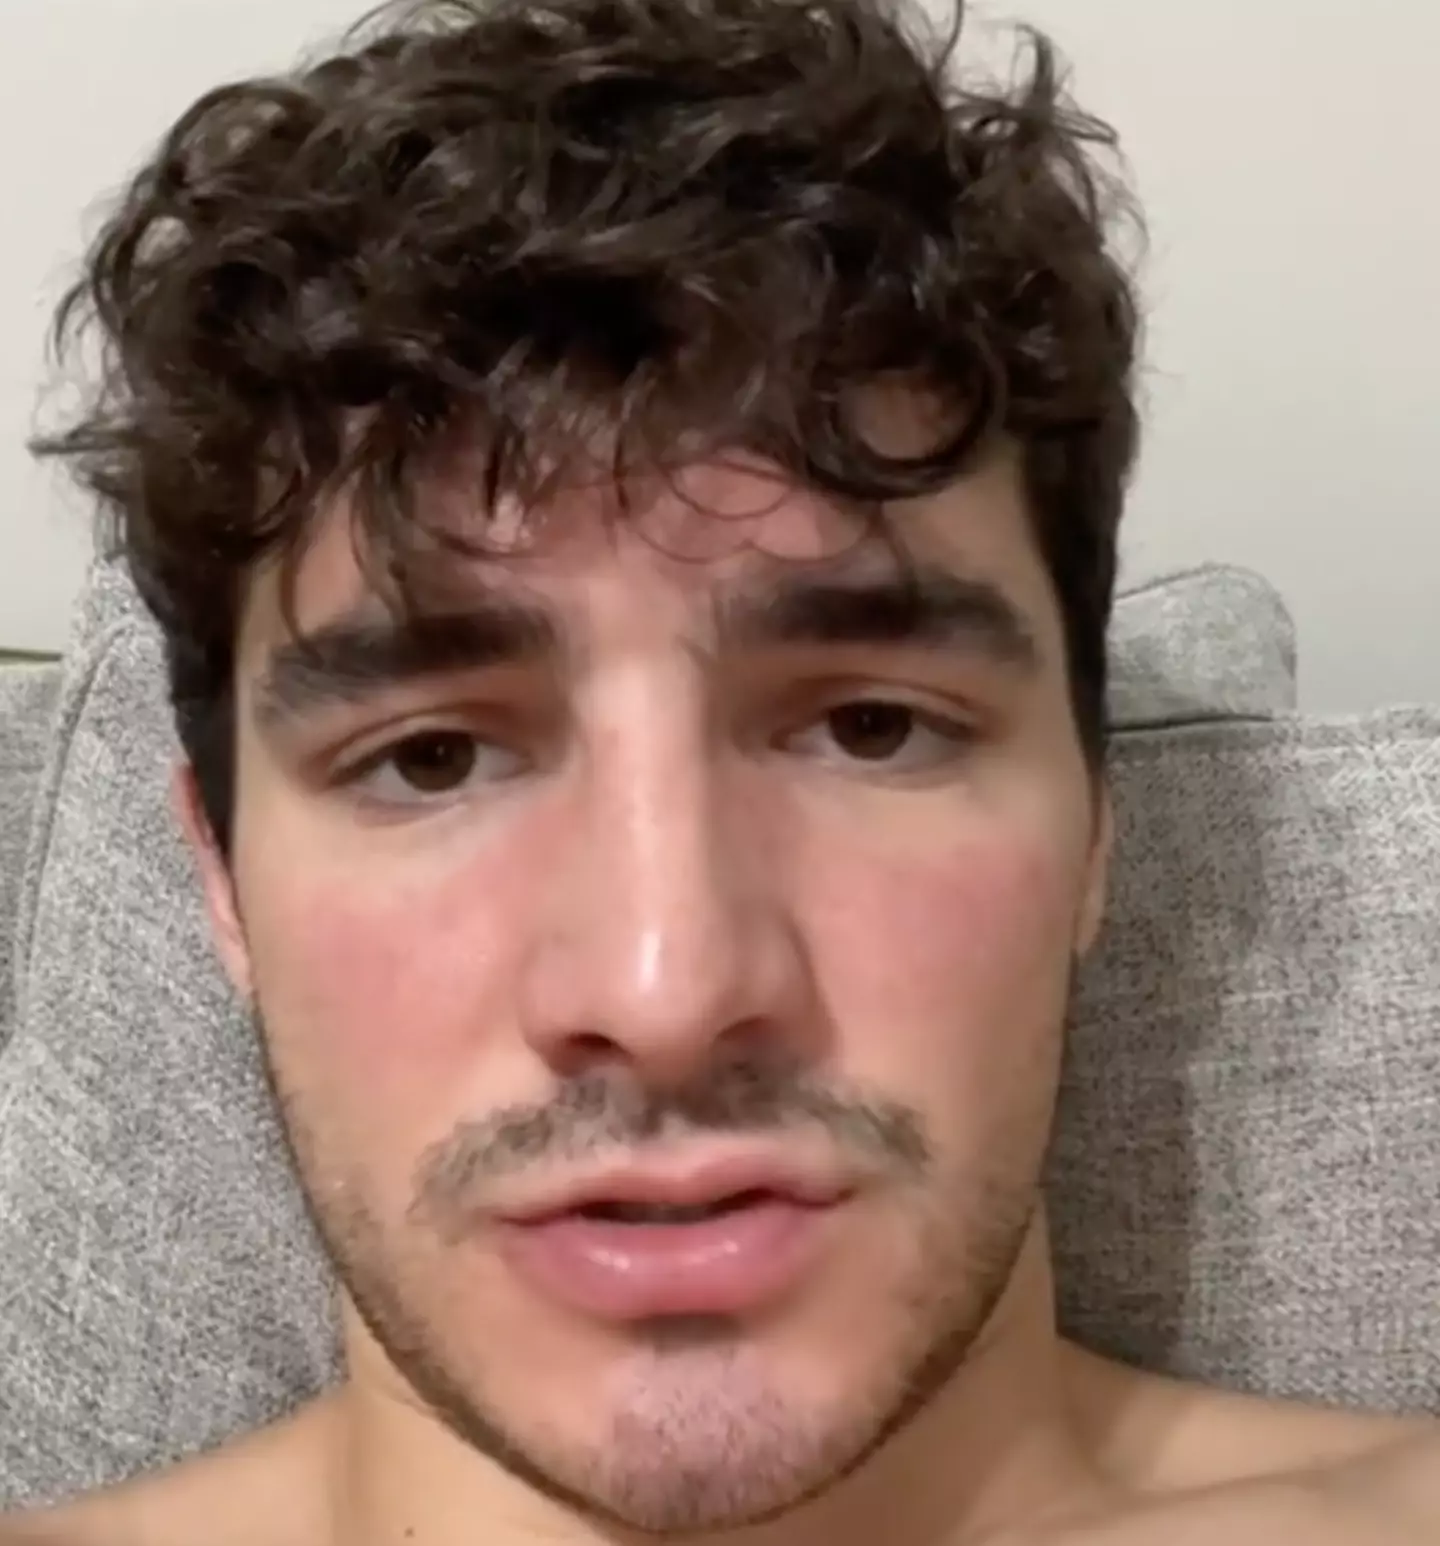 Jake Goldberg took to TikTok to answer questions from users.